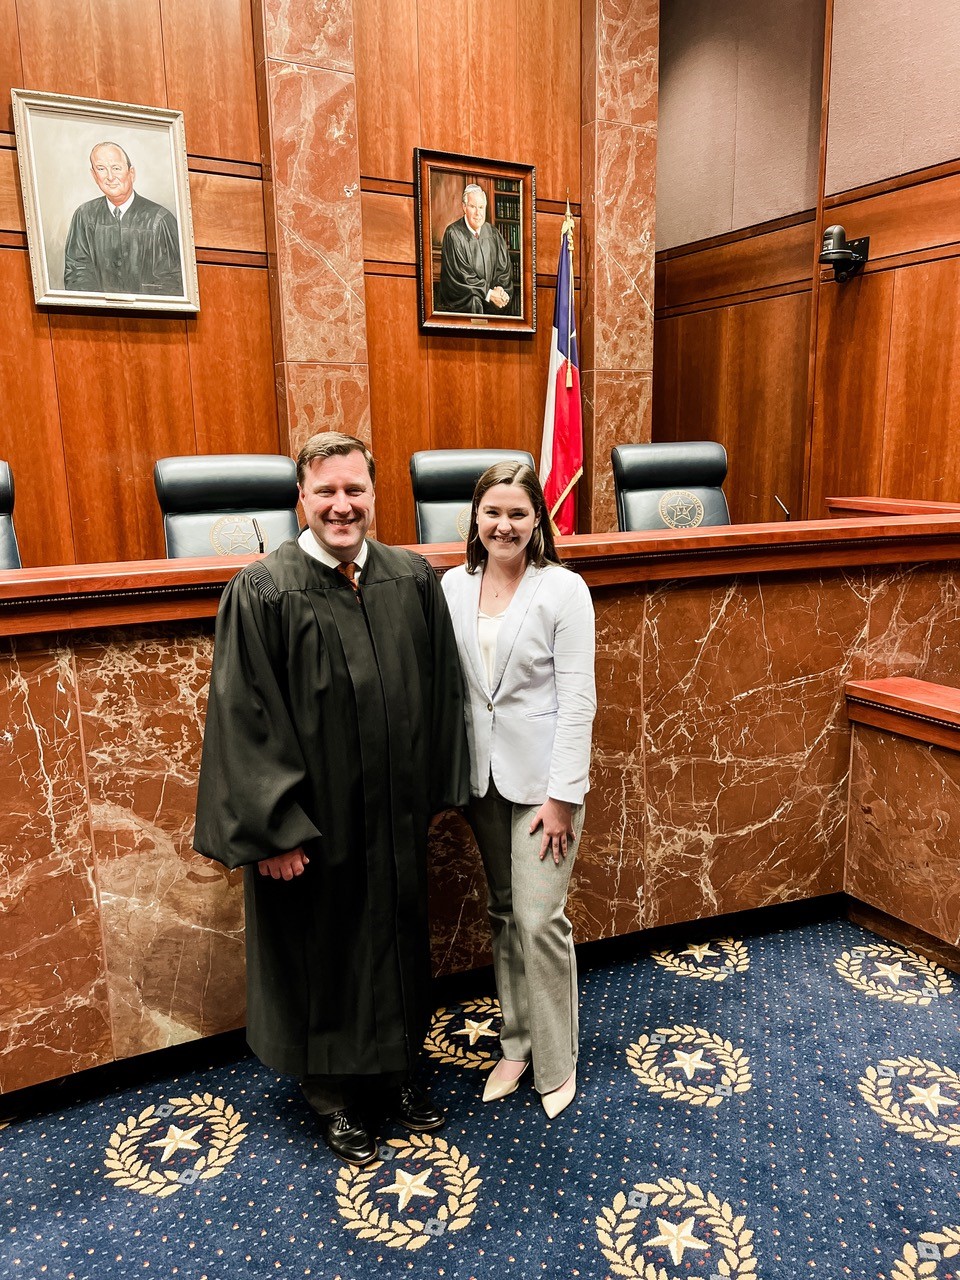 Judge and student pose in a courtroom